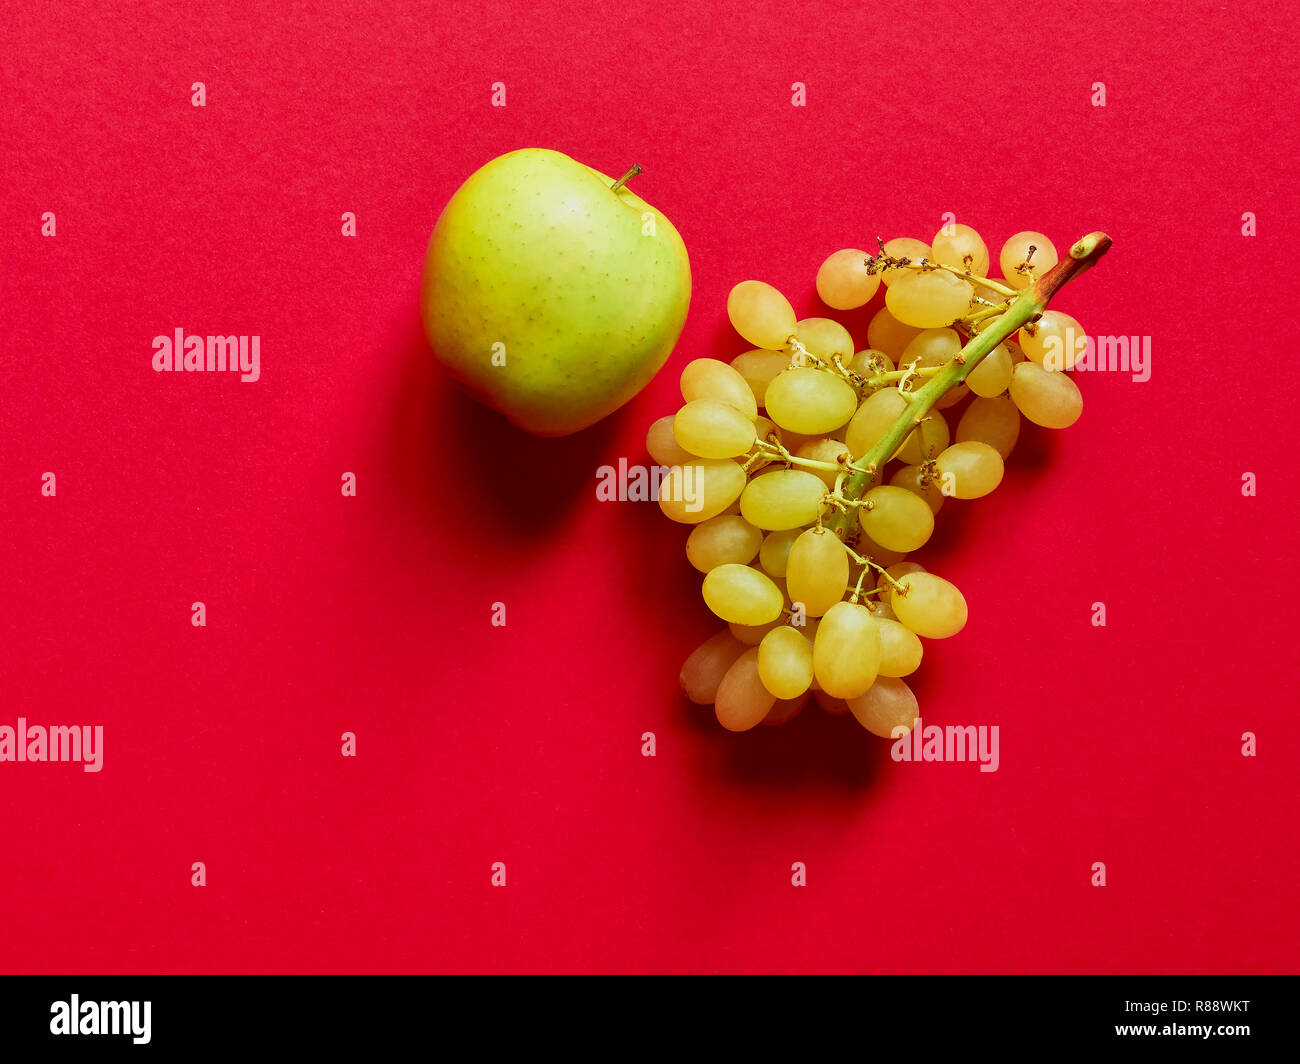 Green apple and bunch of green grapes isolated in studio against a red background viewed from above Stock Photo